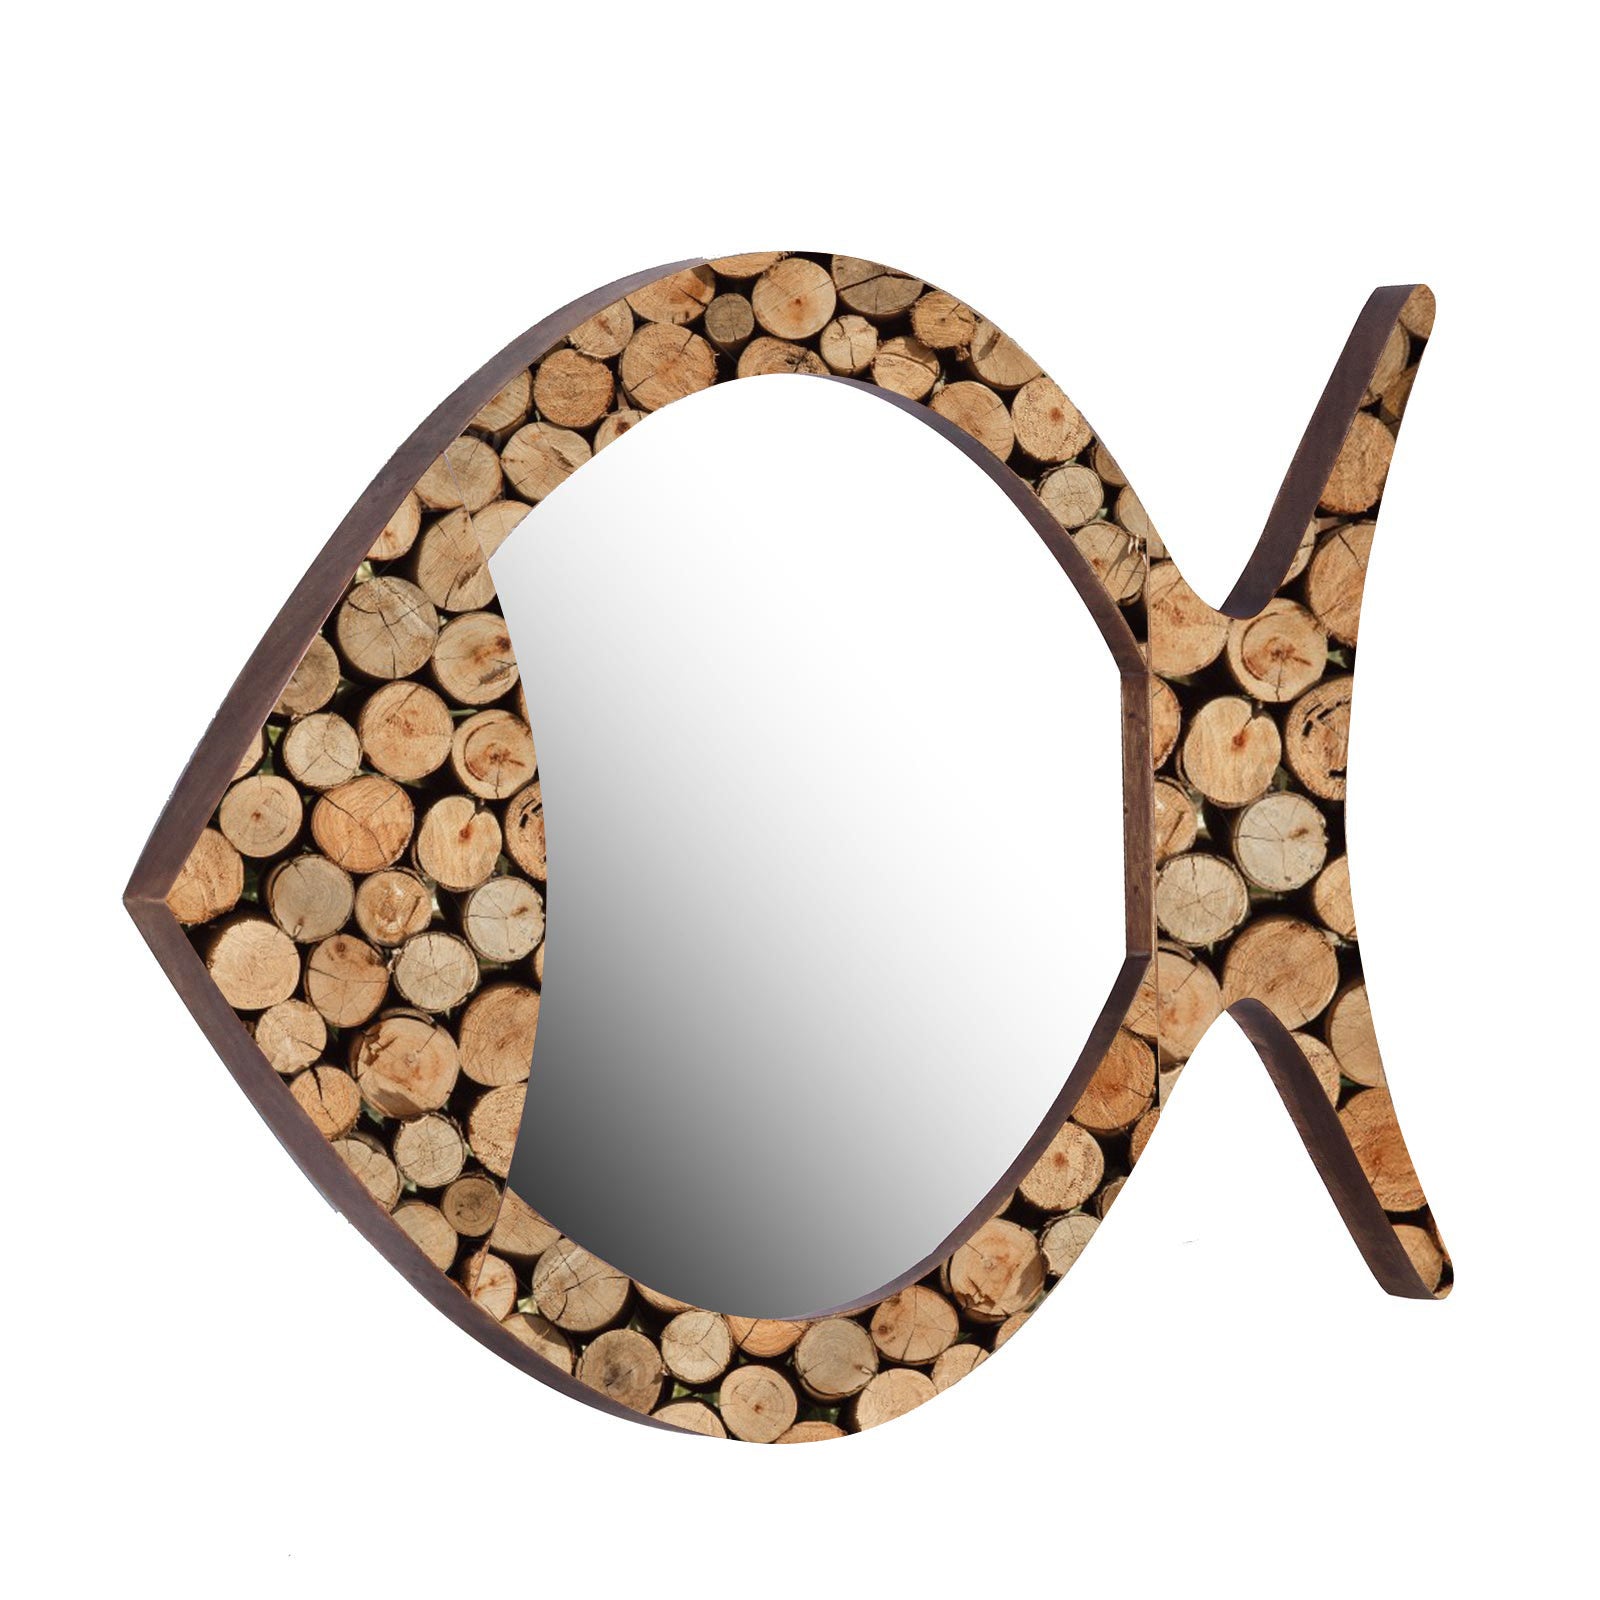 Detec™ Solid Wood Wall Mirror 32inches